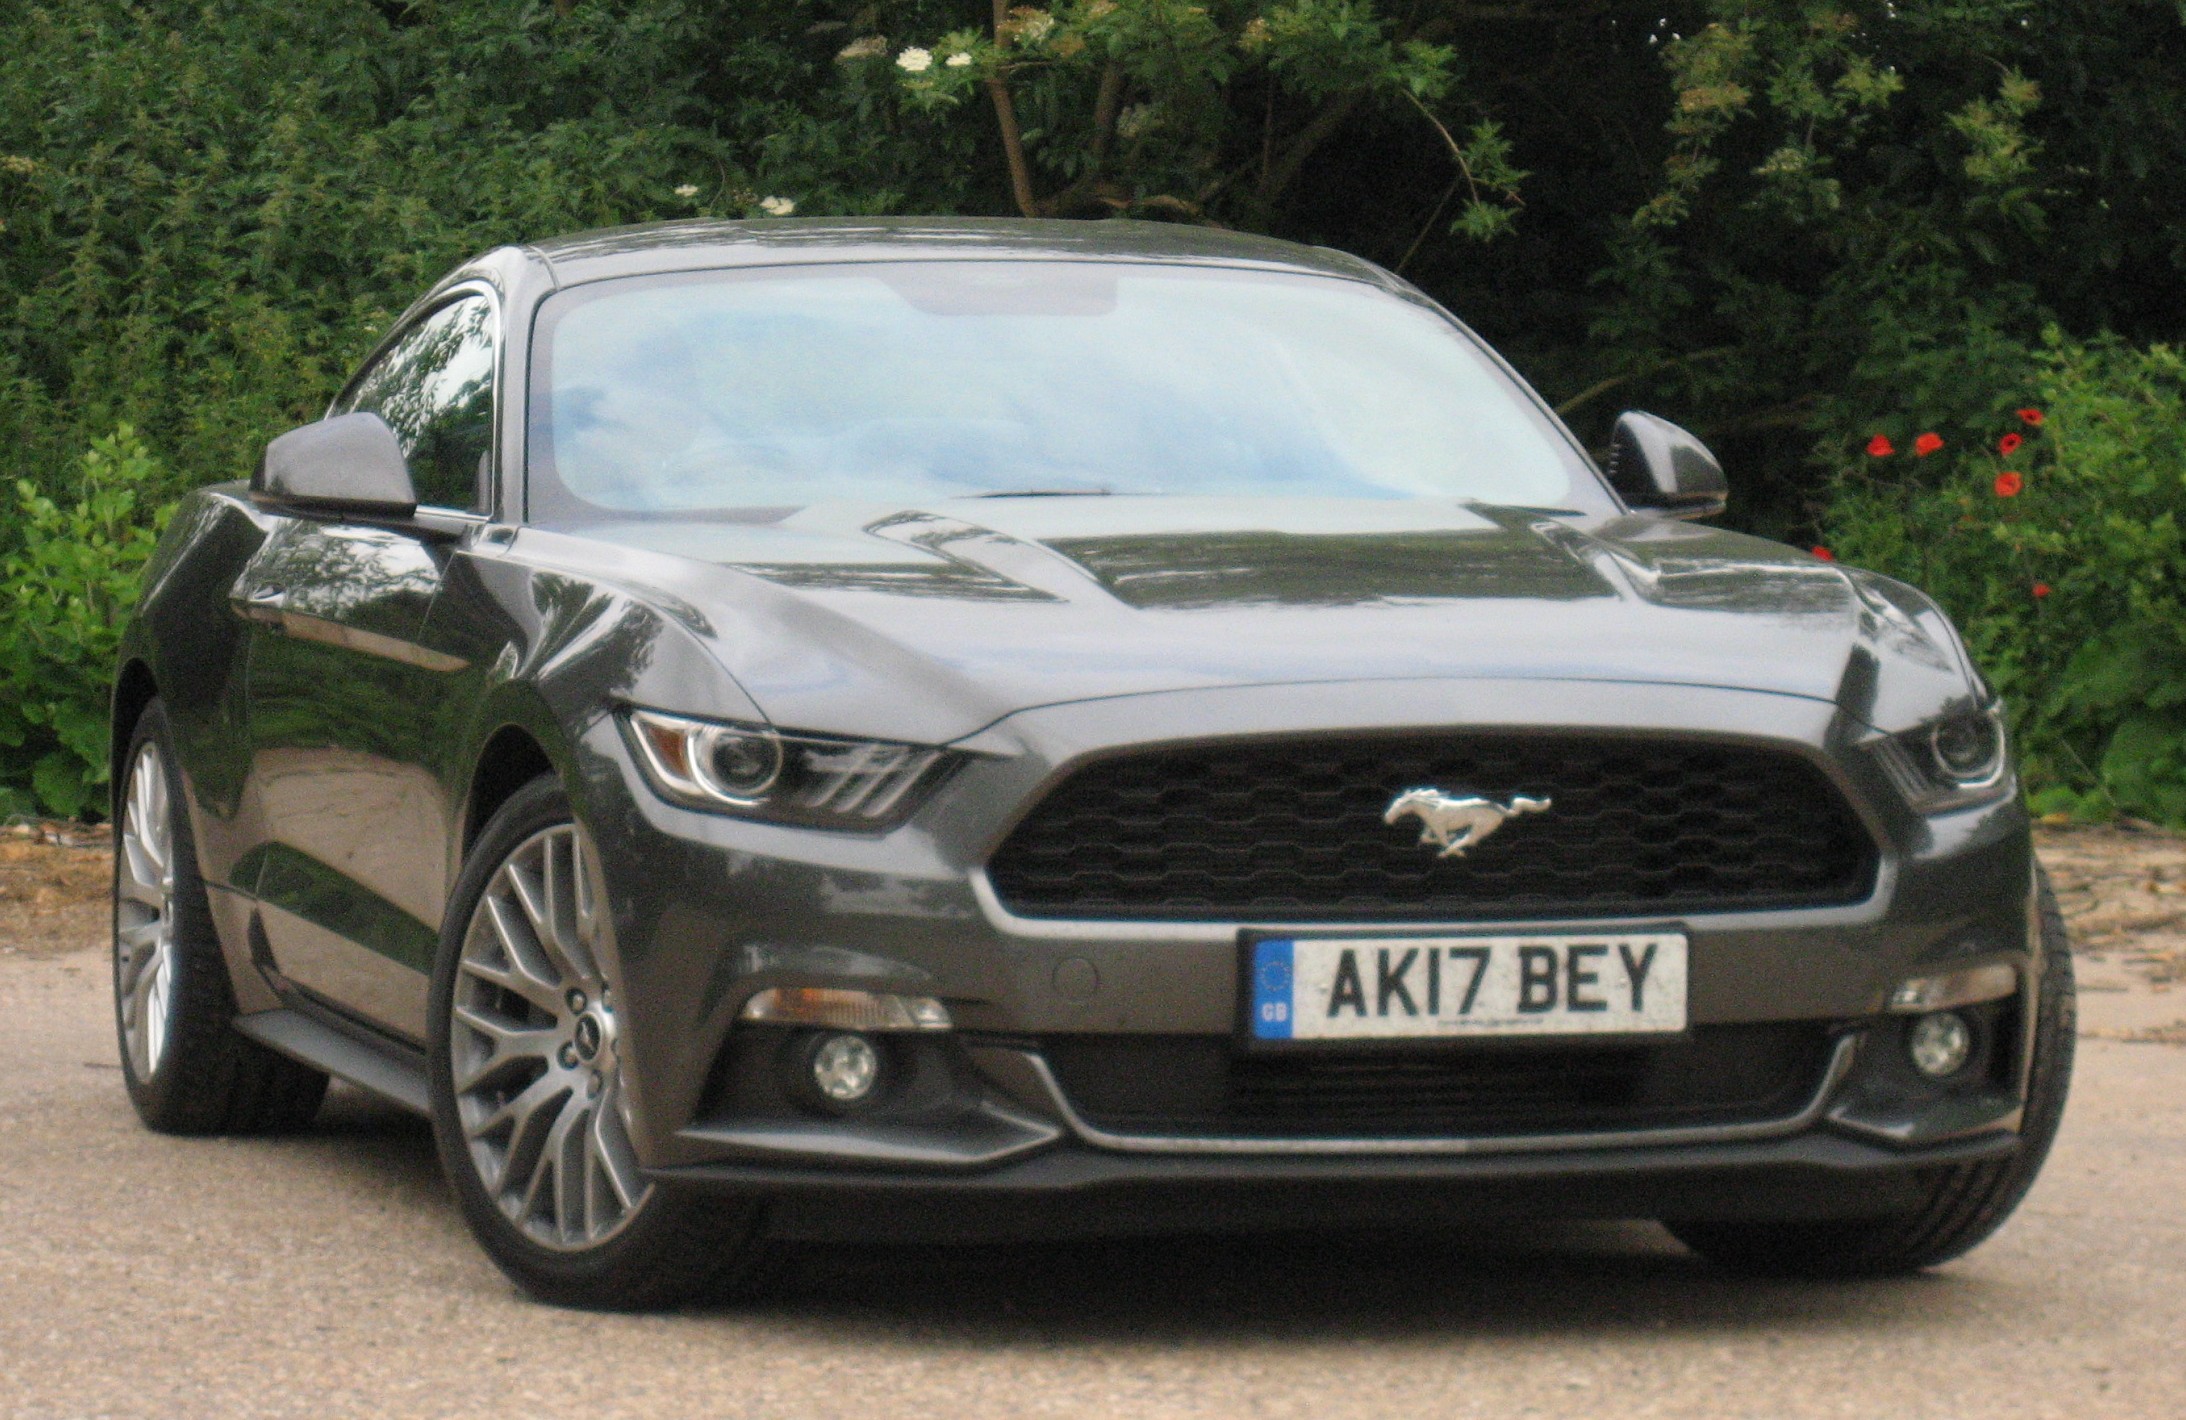 Ford Mustang 2.3 EcoBoost Auto road test report and review